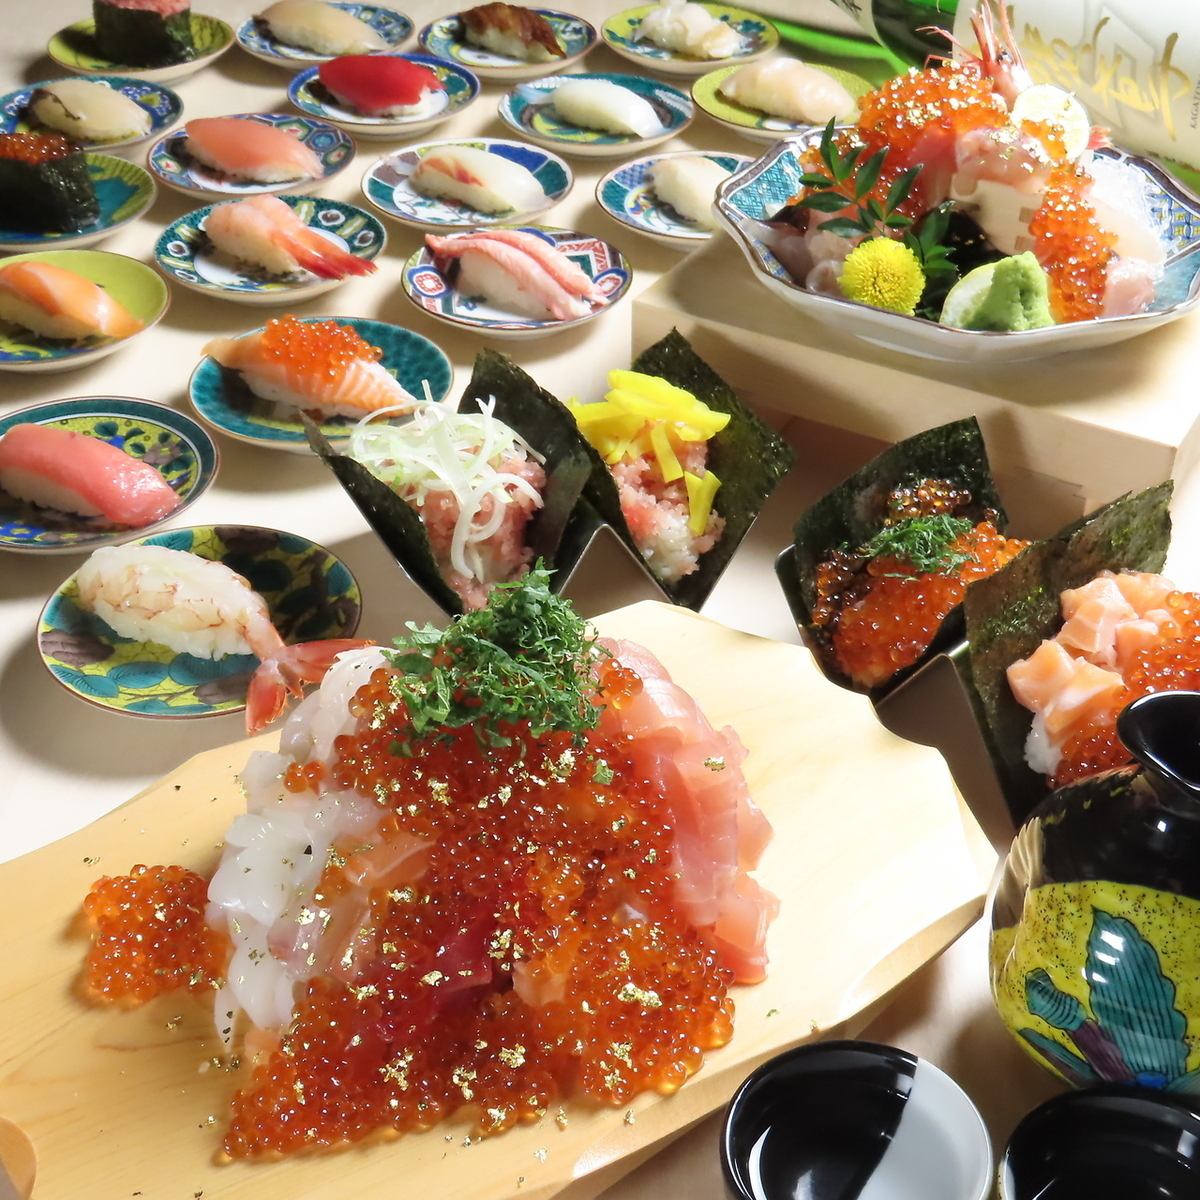 You can enjoy Kanazawa's proud seasonal ingredients in a luxurious and affordable way!